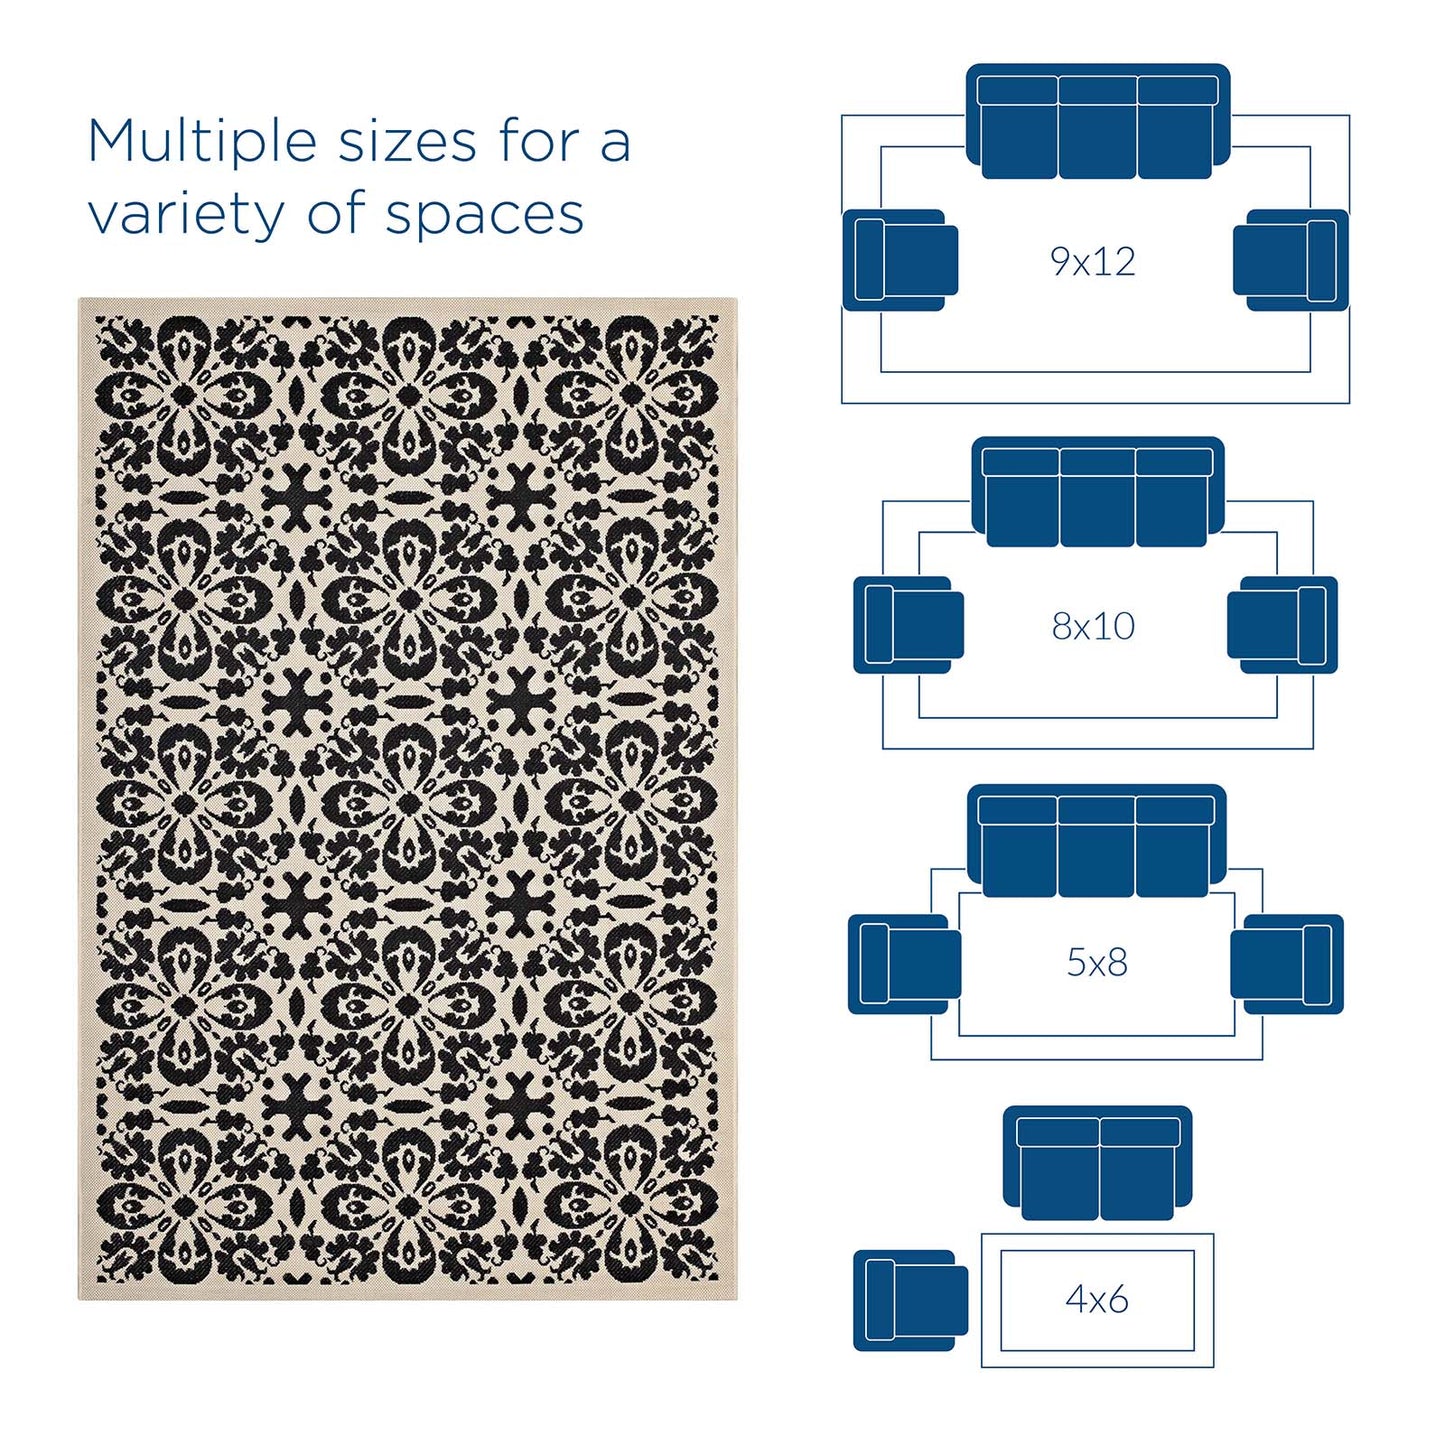 Ariana Vintage Floral Trellis 9x12 Indoor and Outdoor Area Rug Black and Beige R-1142E-912